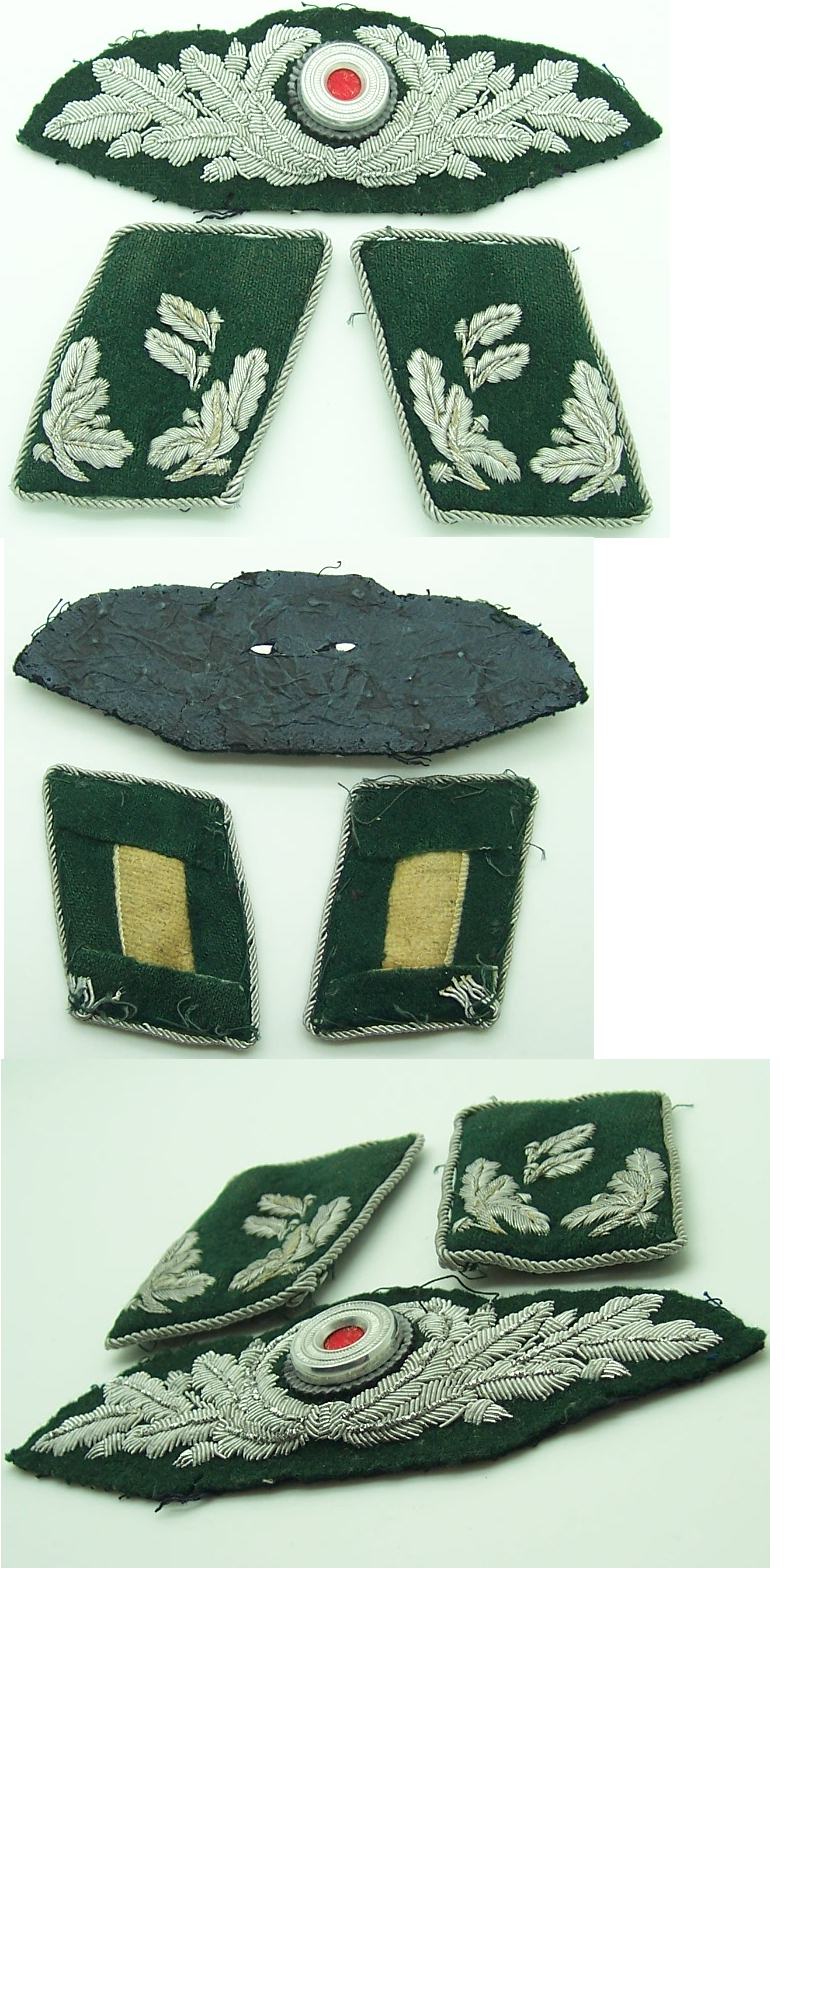 Forestry Official's Wreath cockage and Collar tabs in Bullion 